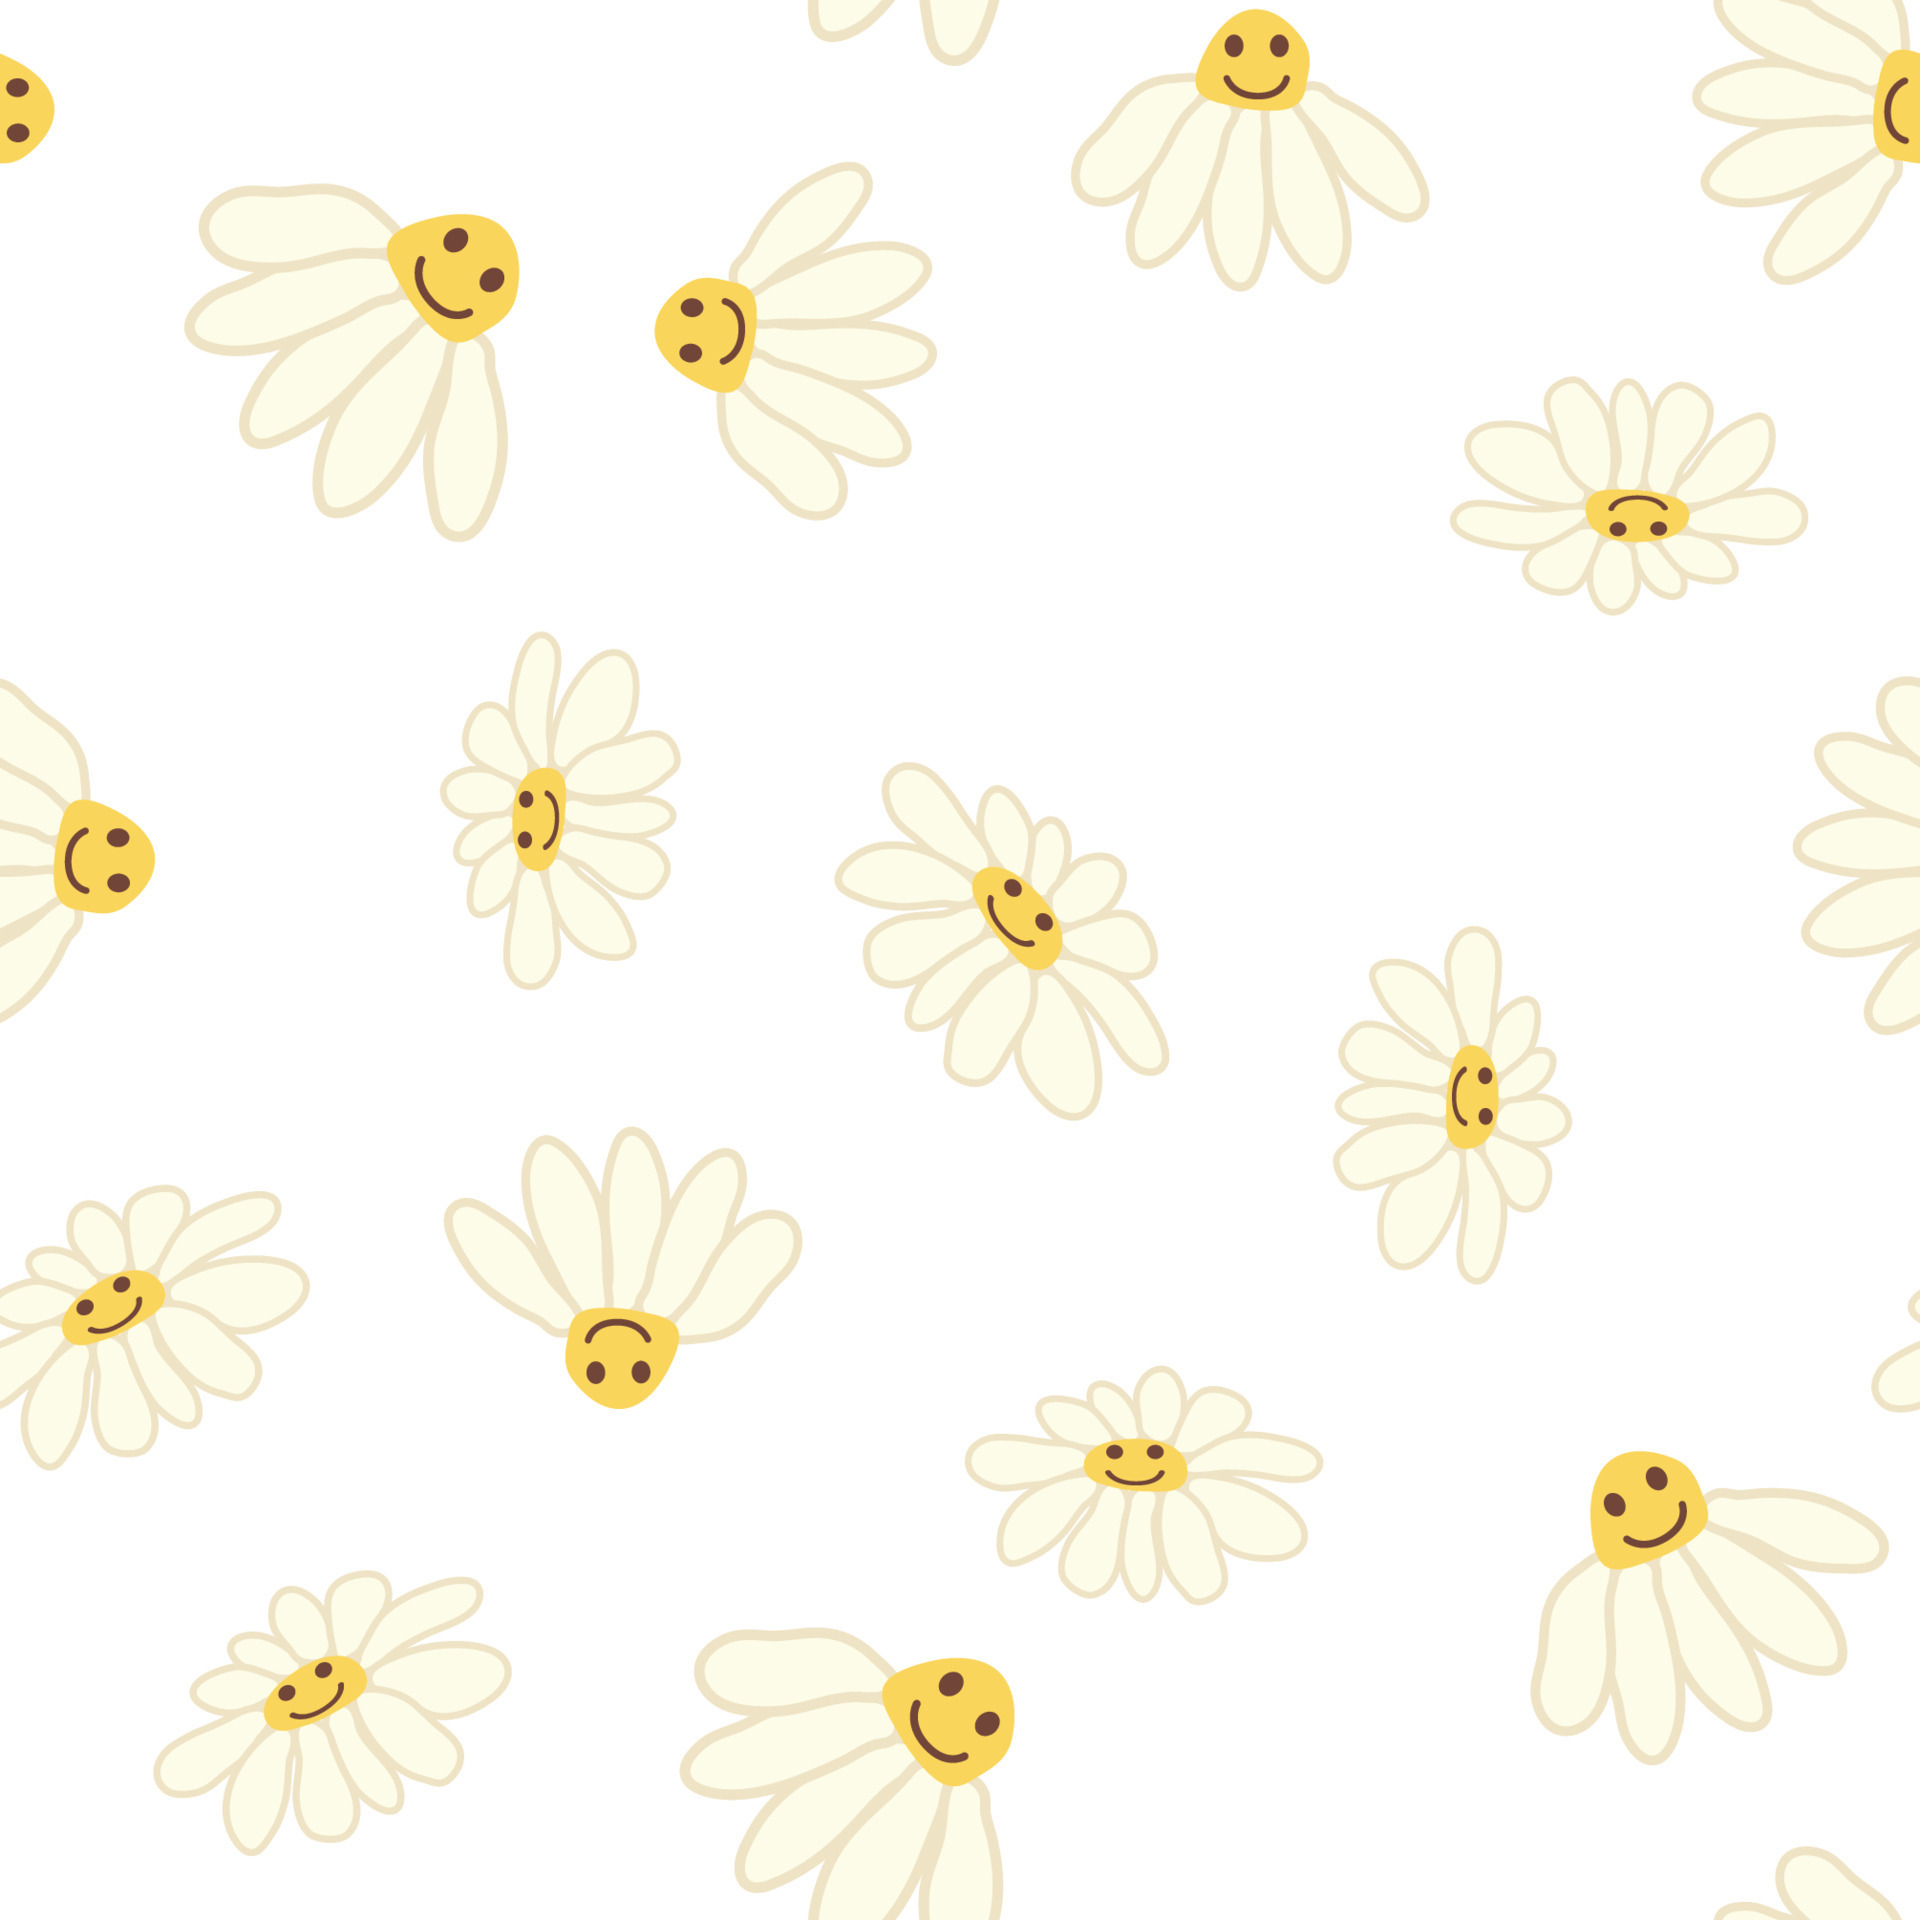 Hippie Aesthetic. 1970s Seamless Pattern Pack In Yellow, Daisy